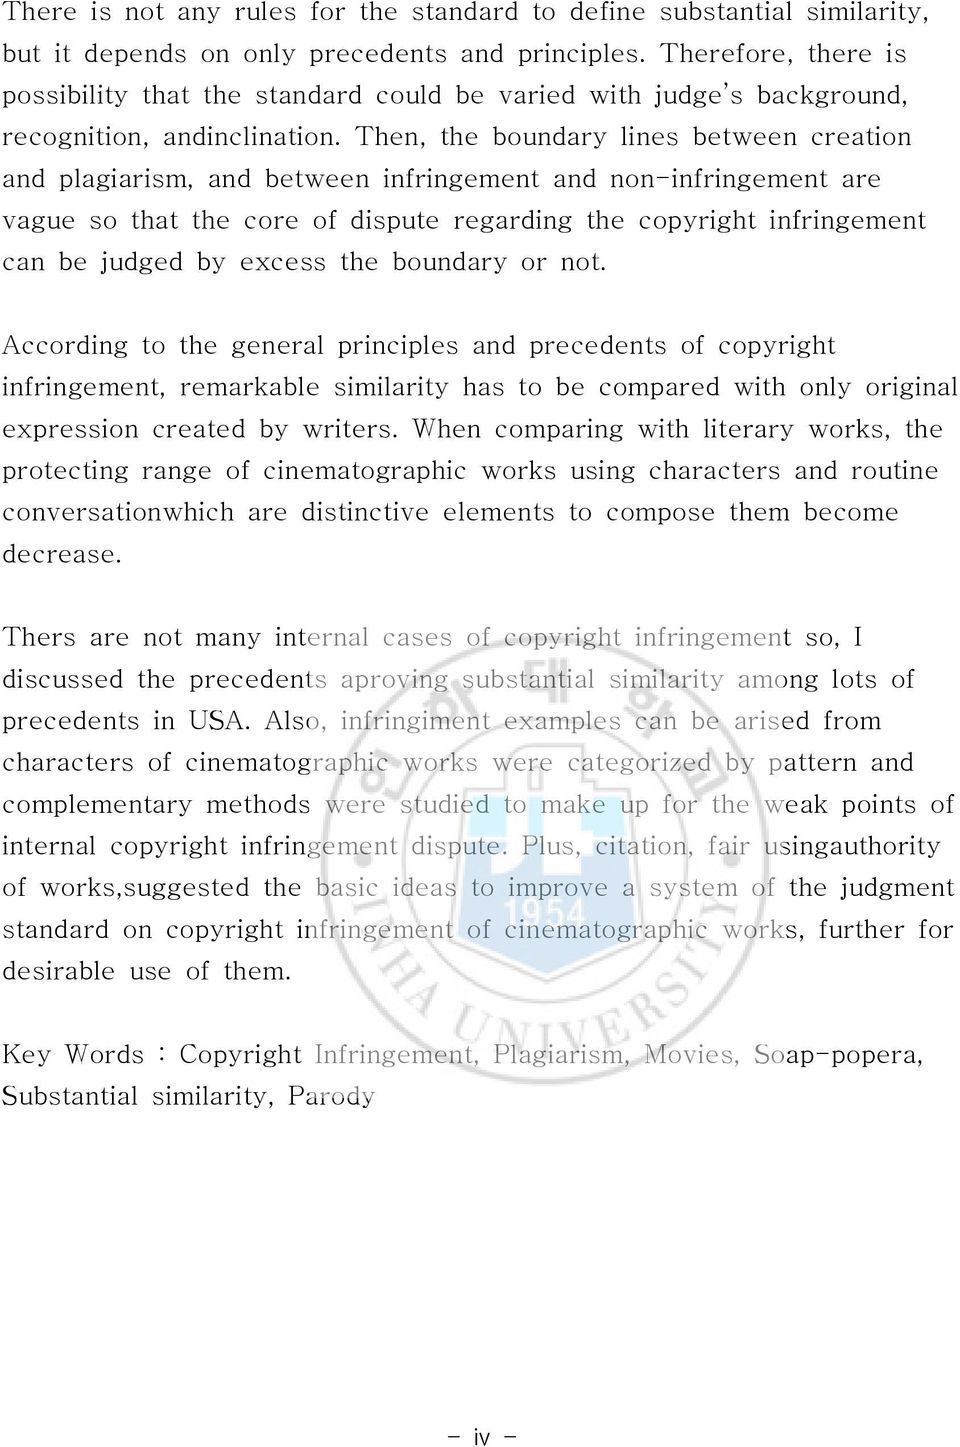 Then, the boundary lines between creation and plagiarism, and between infringement and non-infringement are vague so that the core of dispute regarding the copyright infringement can be judged by